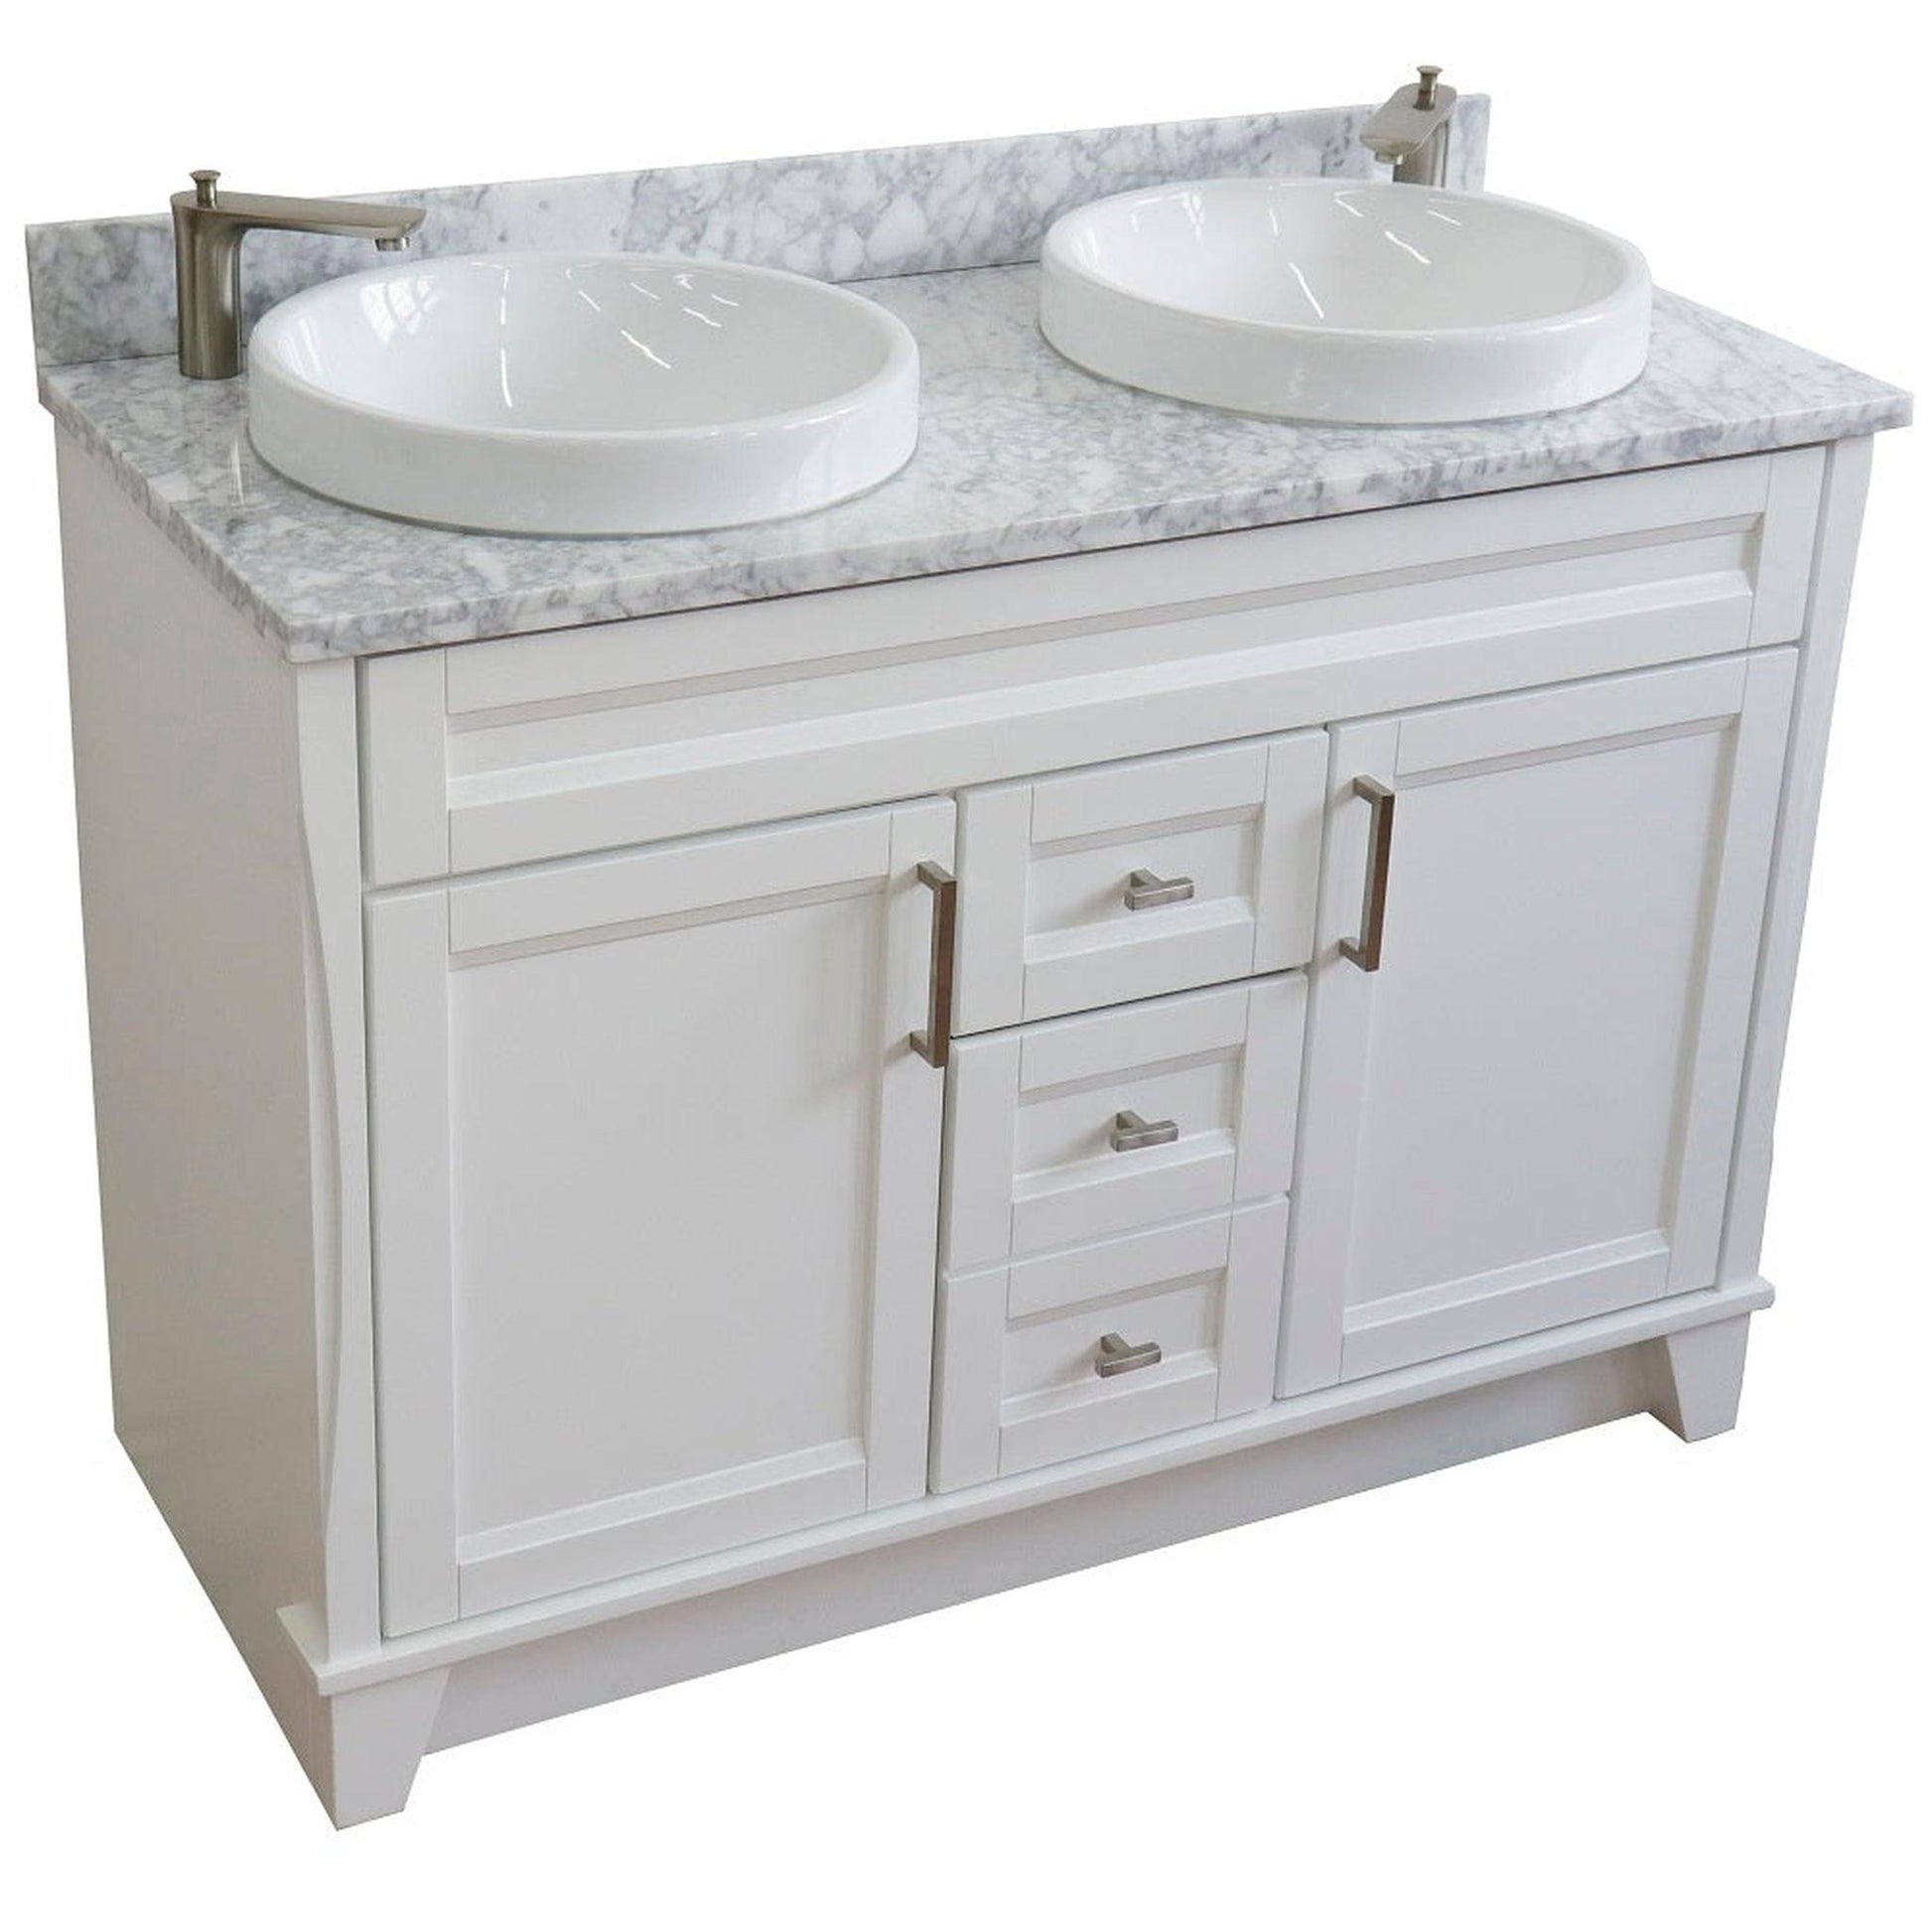 Bellaterra Home Terni 49" 2-Door 2-Drawer White Freestanding Vanity Set With Ceramic Double Vessel Sink and White Carrara Marble Top